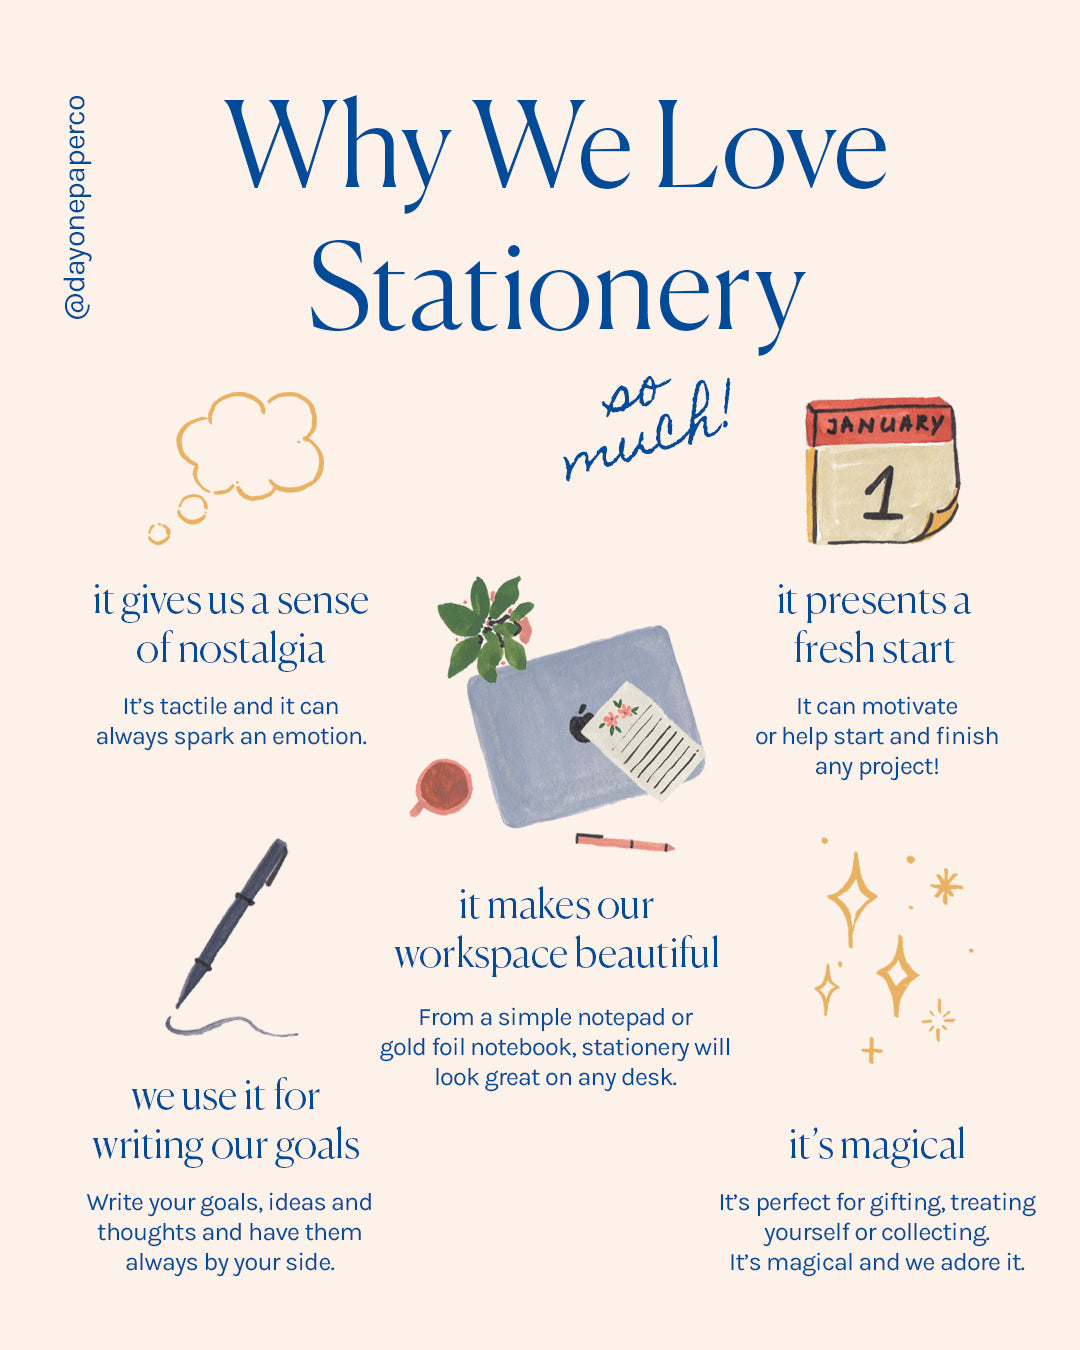 Why we love stationery